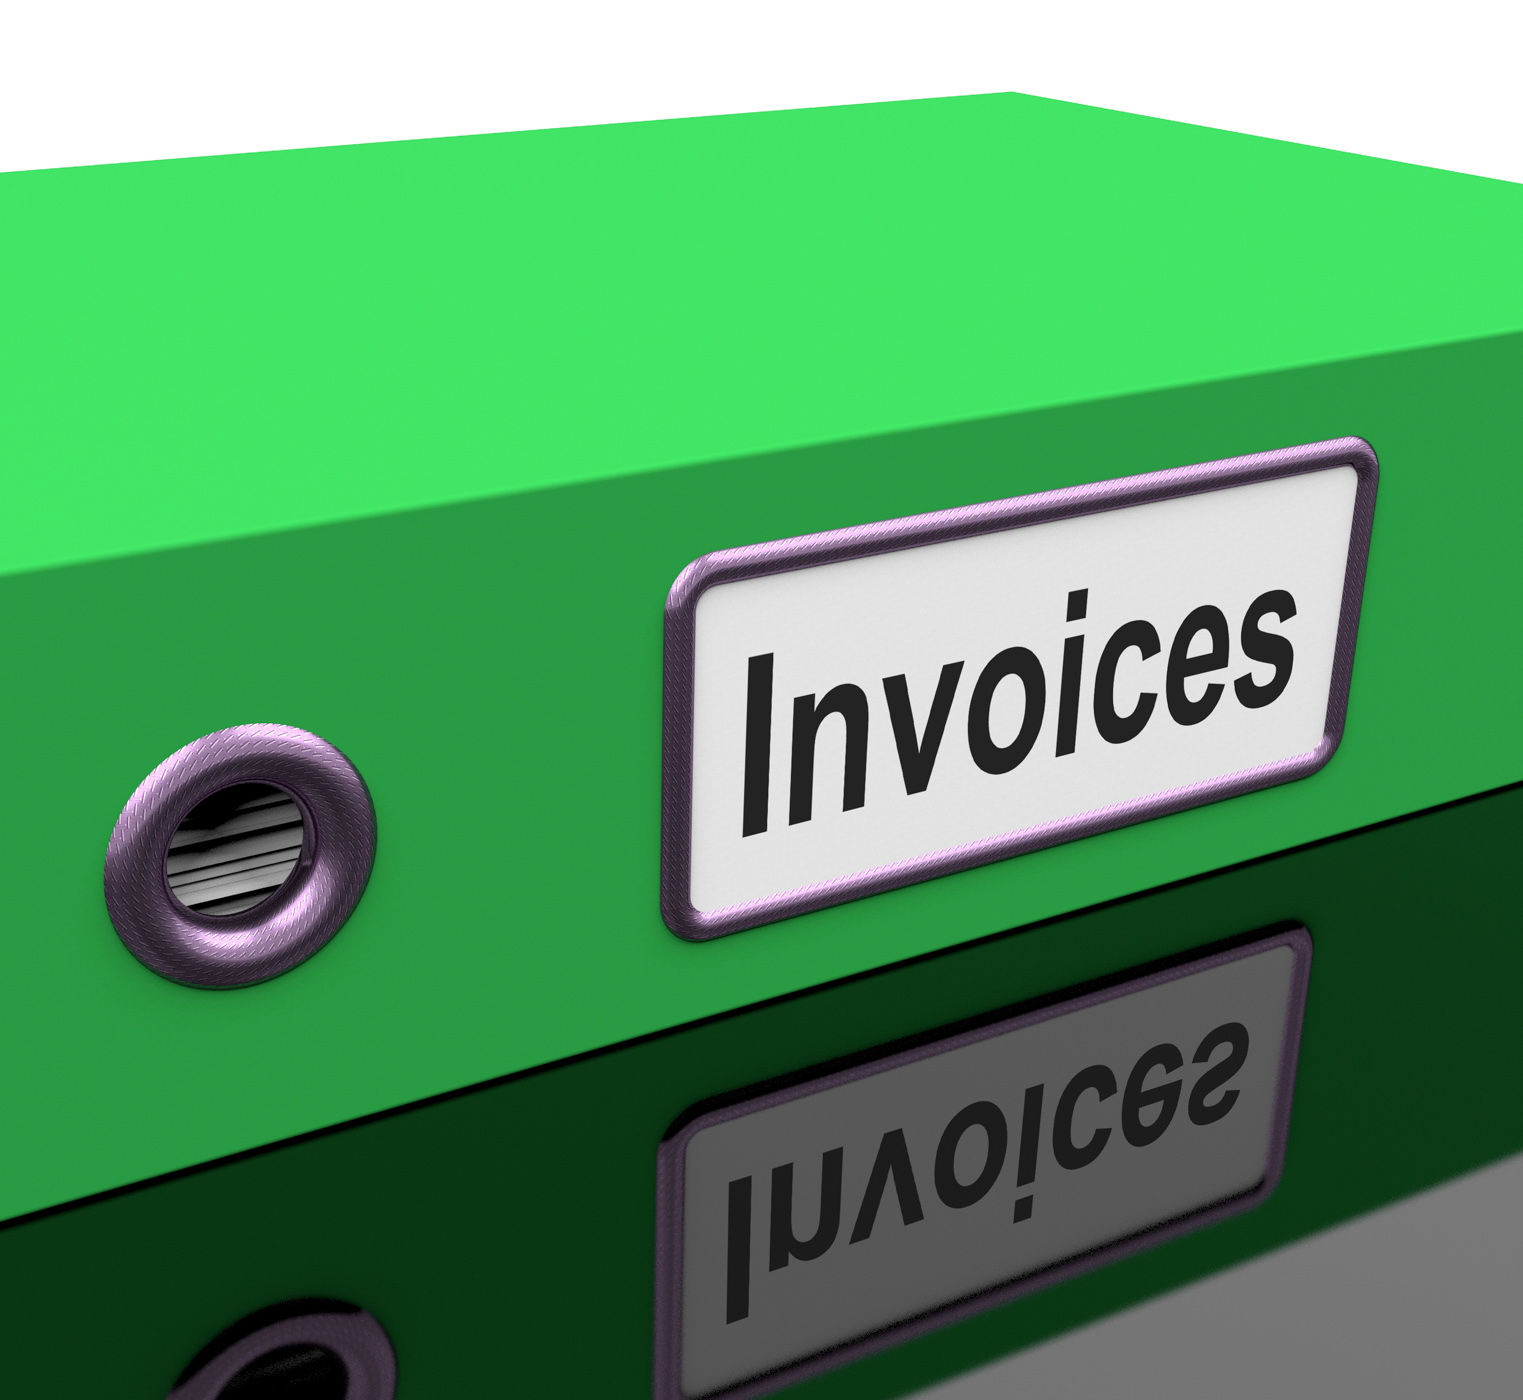 Invoices file show accounting and expenses photo